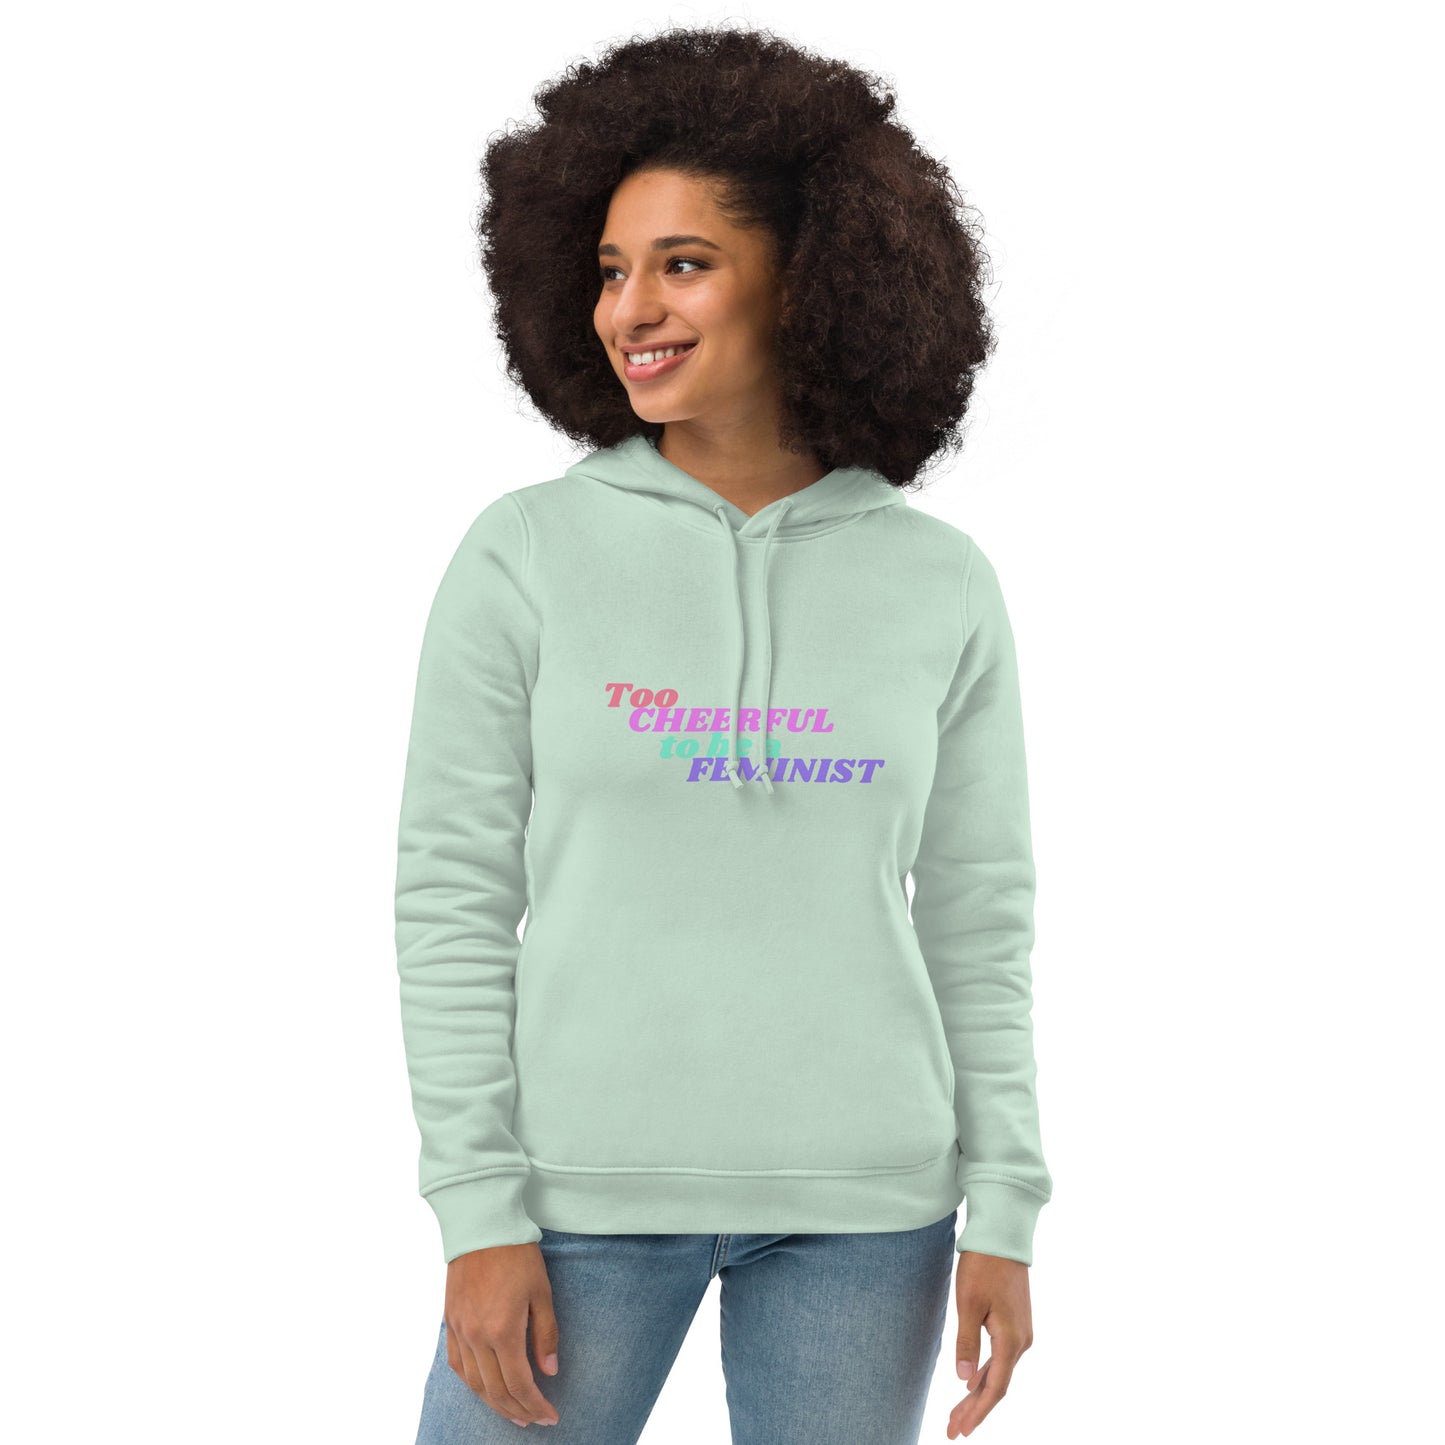 Too Cheerful To Be A Feminist | Hoodie